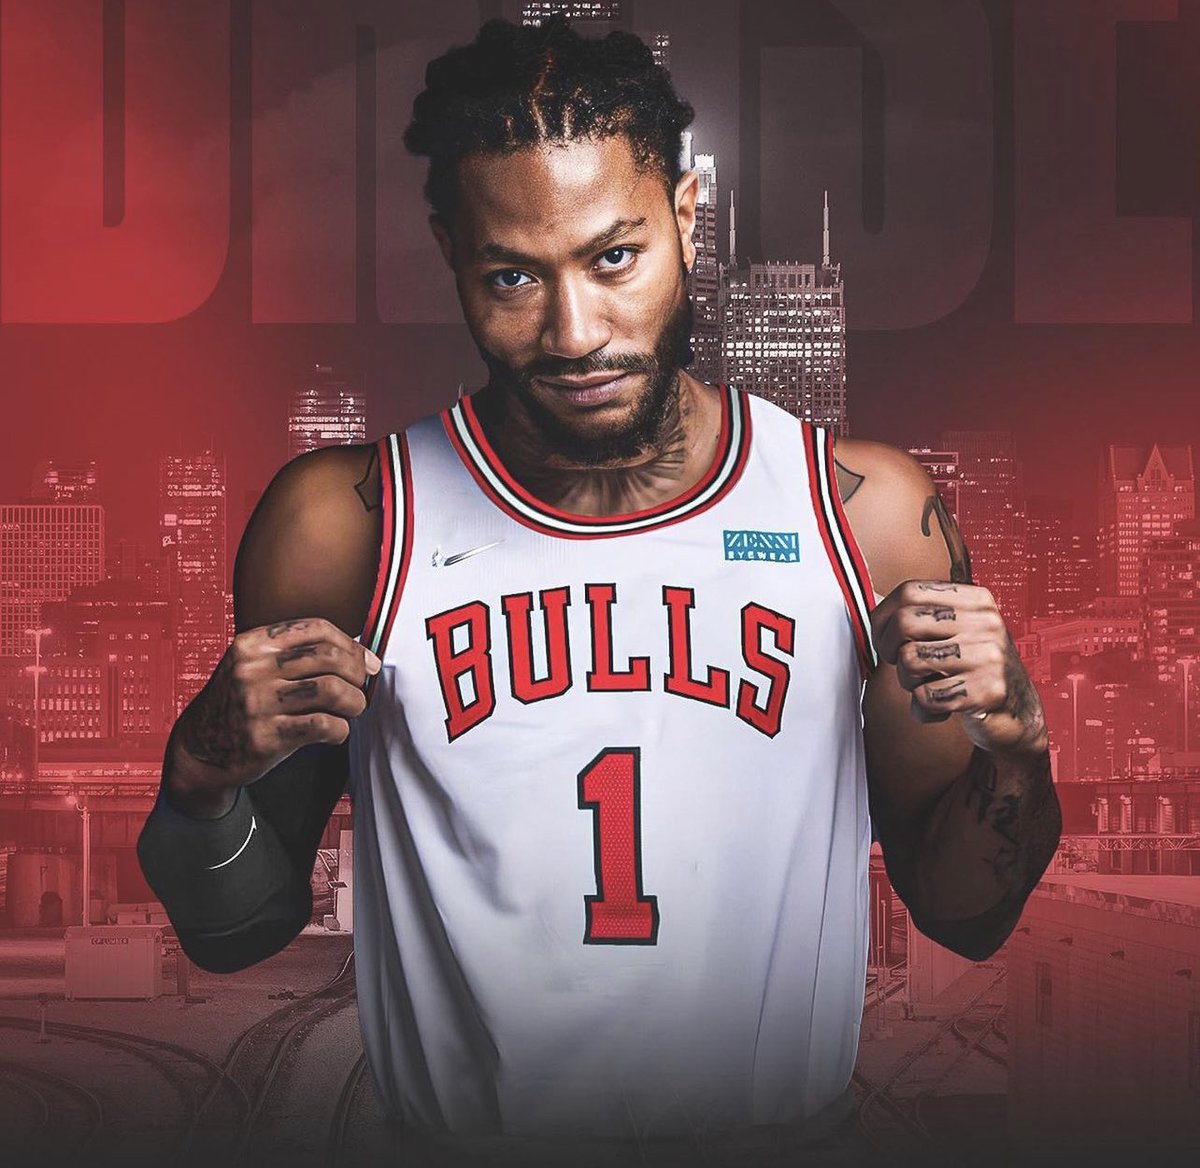 🚨 Derrick Rose could announce his return to Chicago this weekend. 

The #Bulls had ‘serious discussions’ with Rose’s camp to bring him back in 2021, per NBC Sports Chicago.

The Bulls ultimately signed Alex Caruso at a cheaper price.